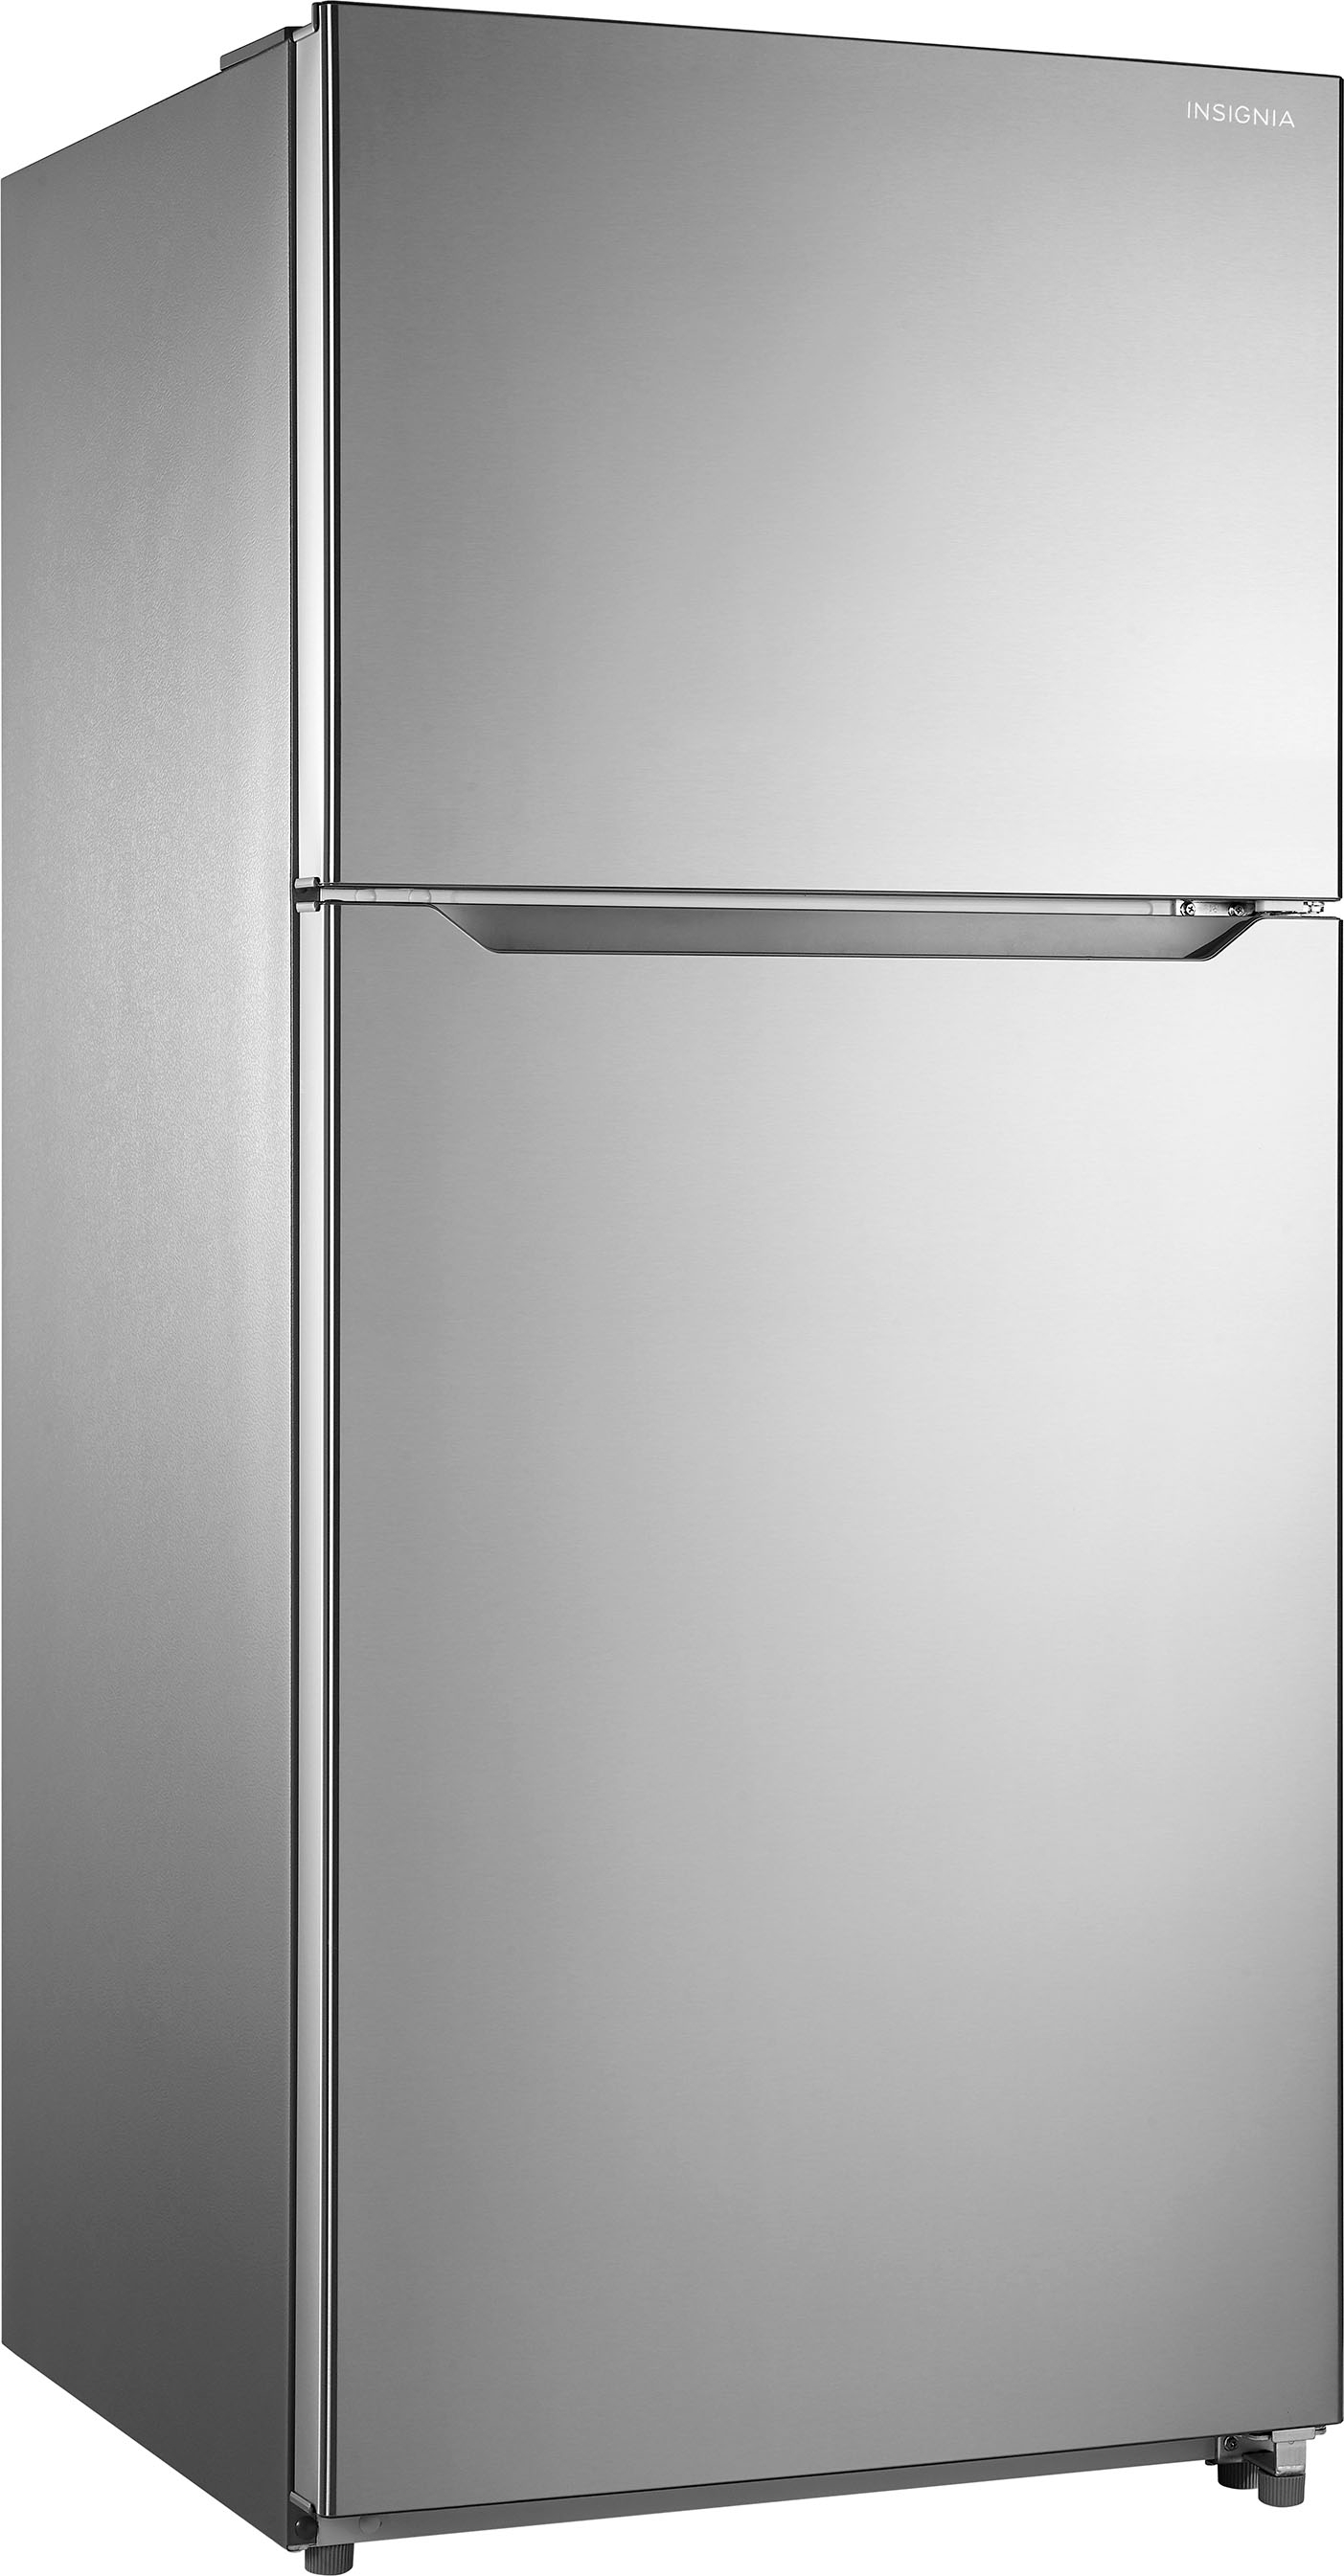 Insignia™ - 18 Cu. Ft. Top-Freezer Refrigerator - Stainless steel